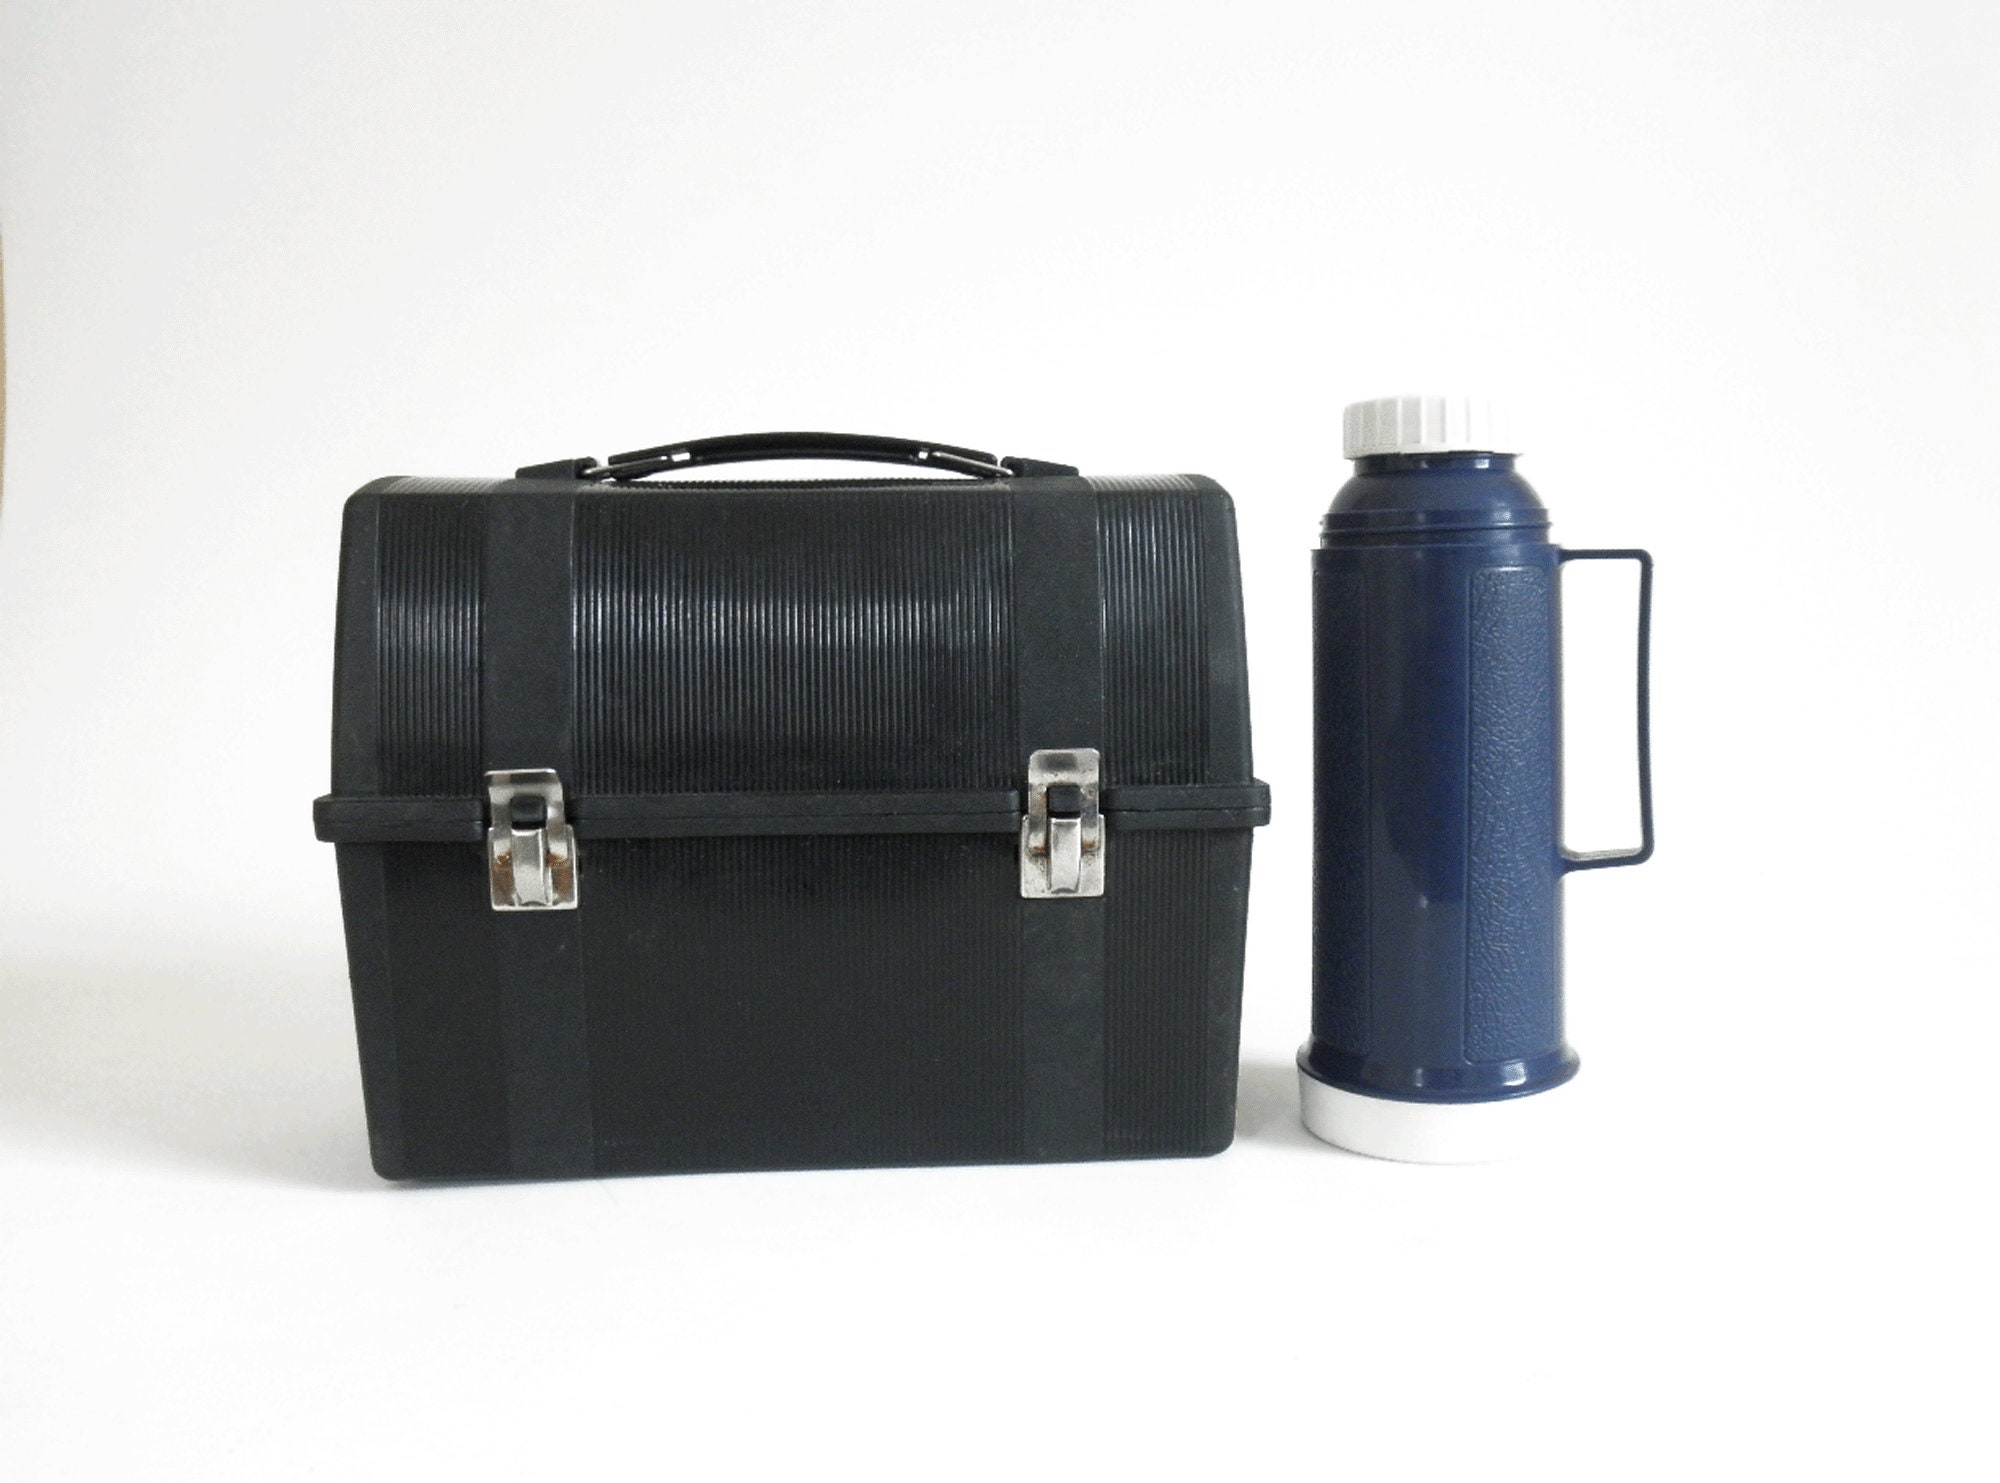 Metal Lunch Box with Thermos 3D model